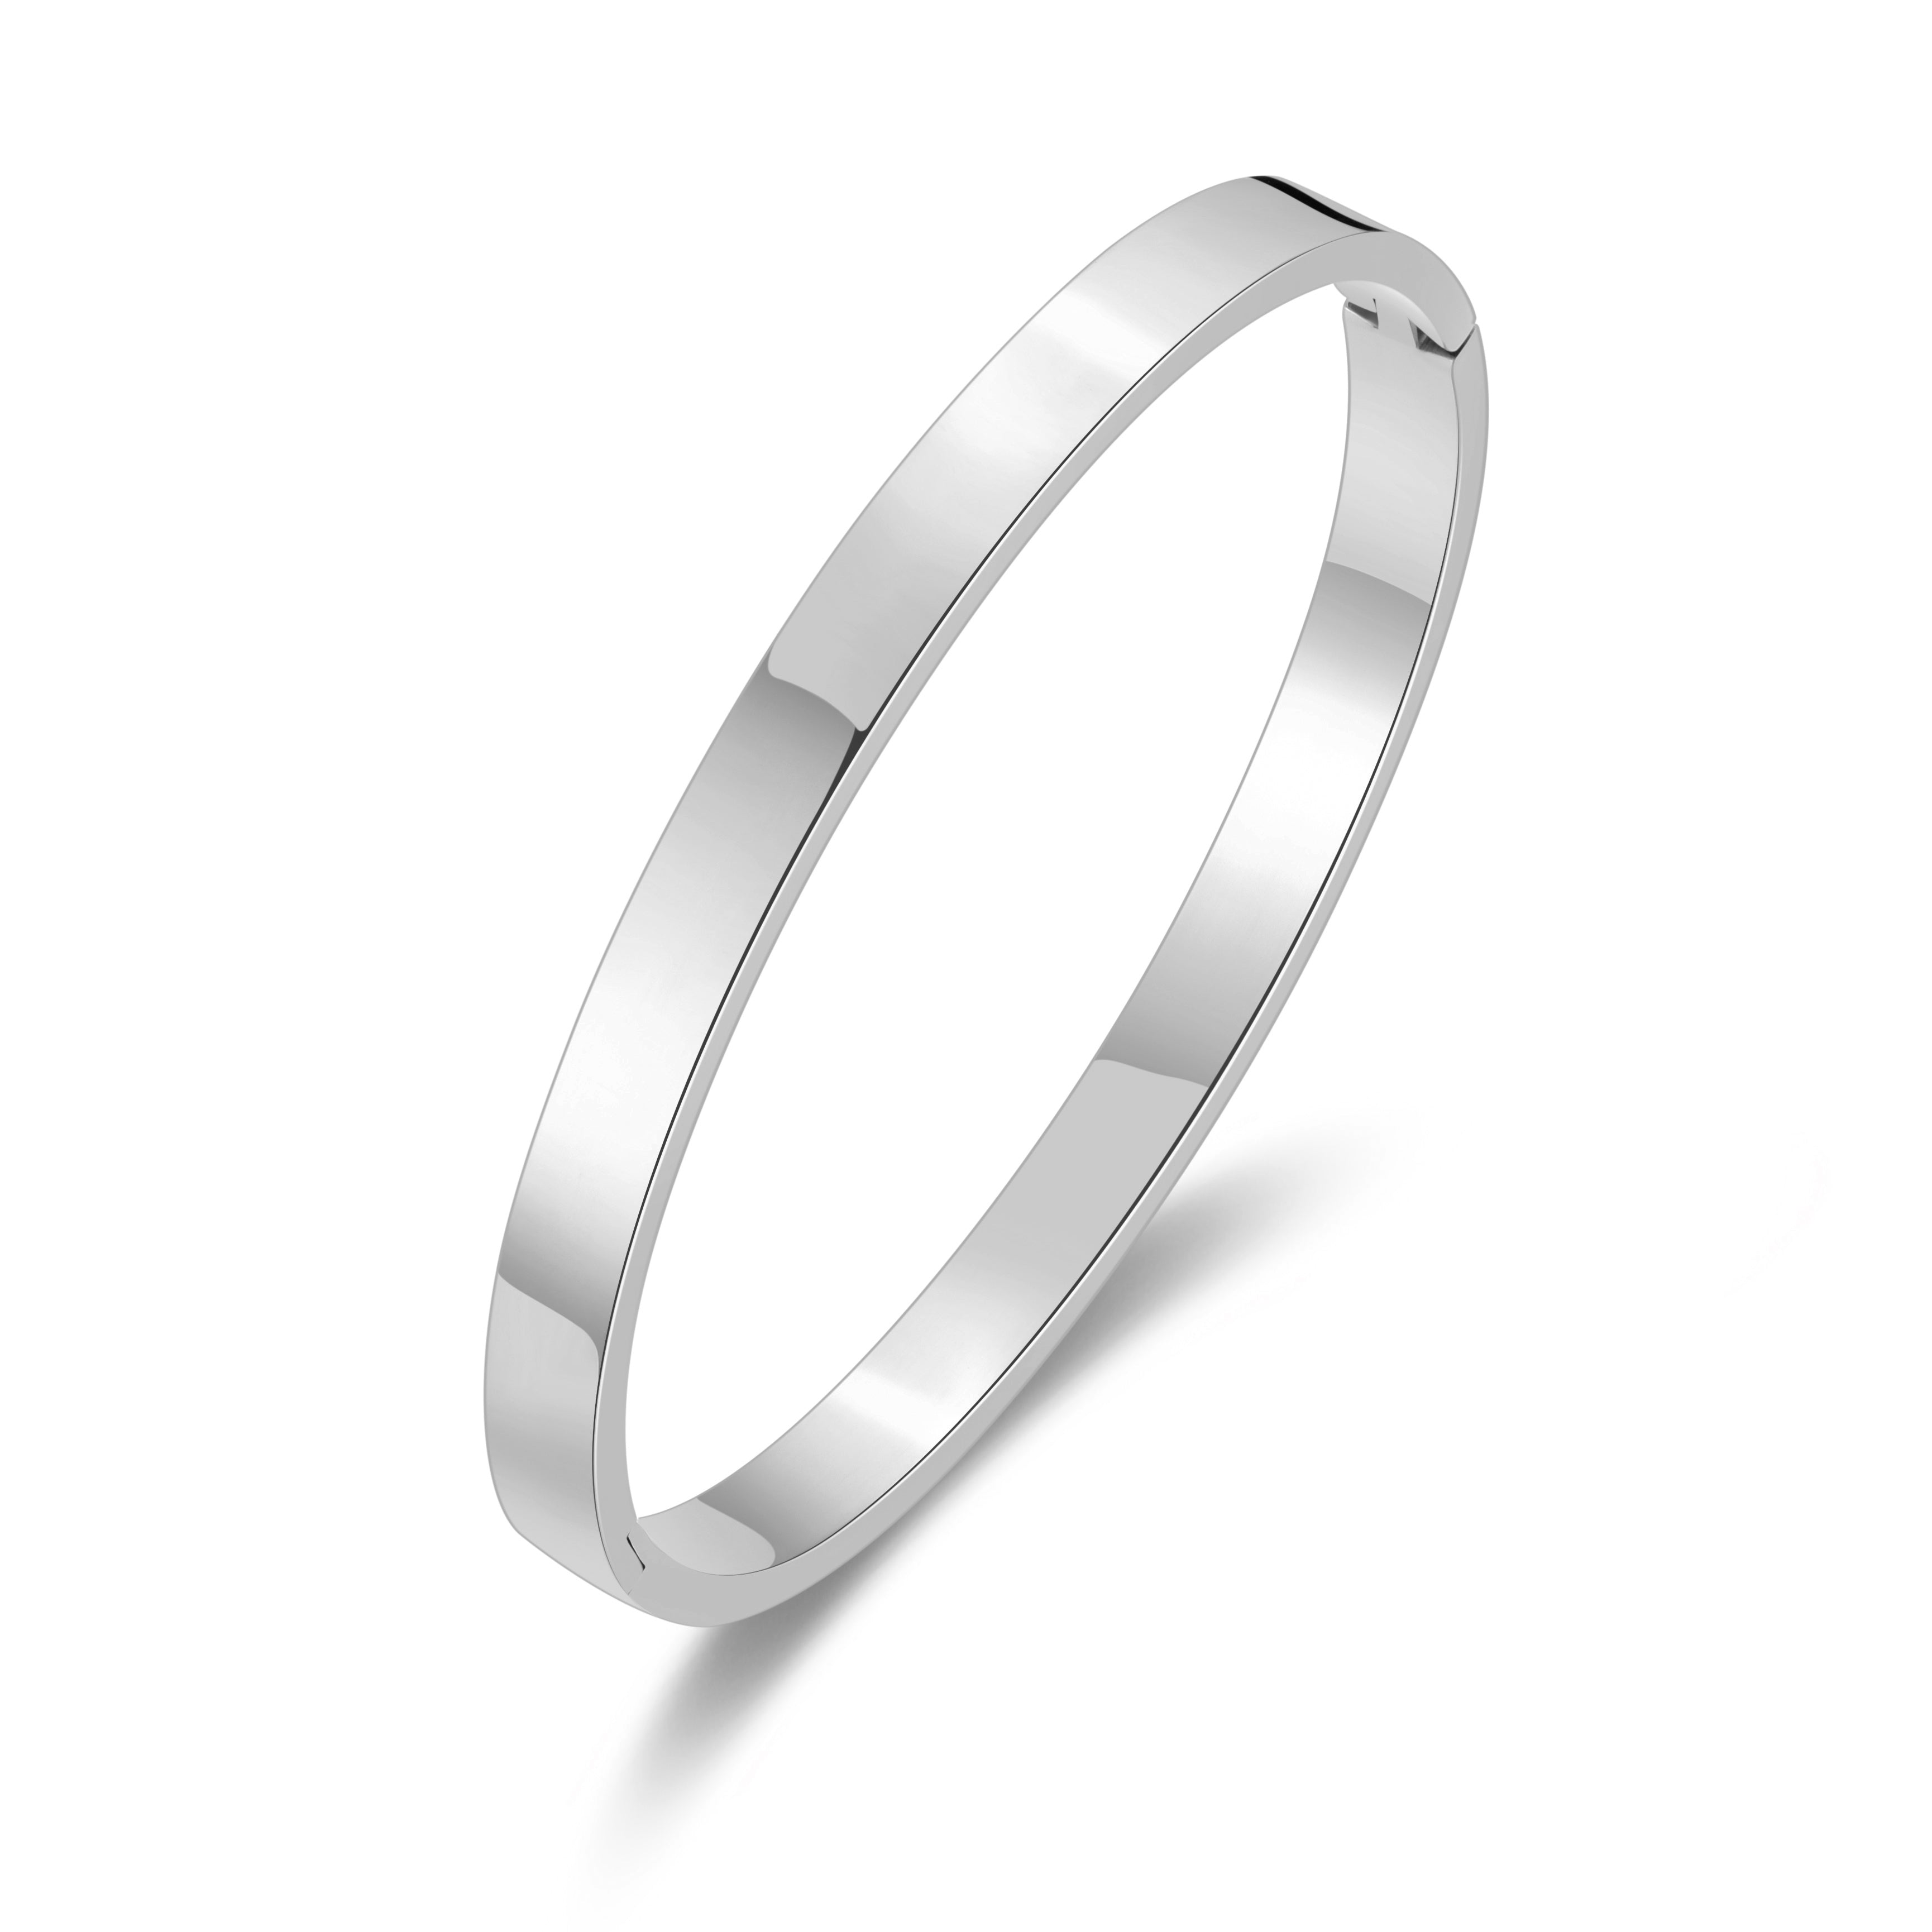 Stainless Steel Polished Bangle by Philip Jones Jewellery